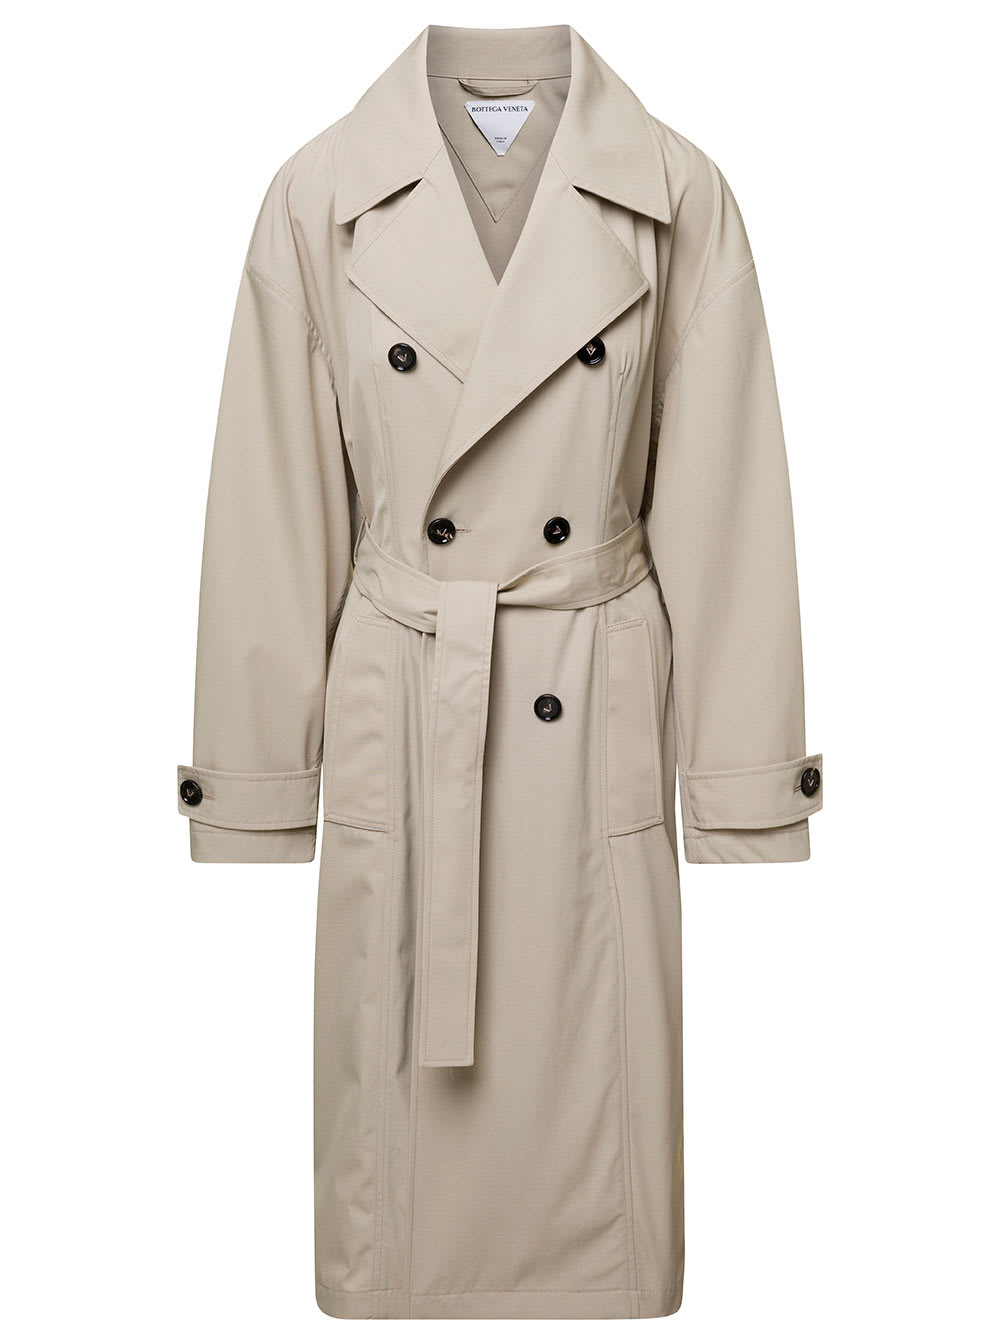 BOTTEGA VENETA BEIGE DOUBLE-BREASTED TRENCH COAT WITH BALLOON EFFECT AT THE BACK IN COTTON BLEND MAN